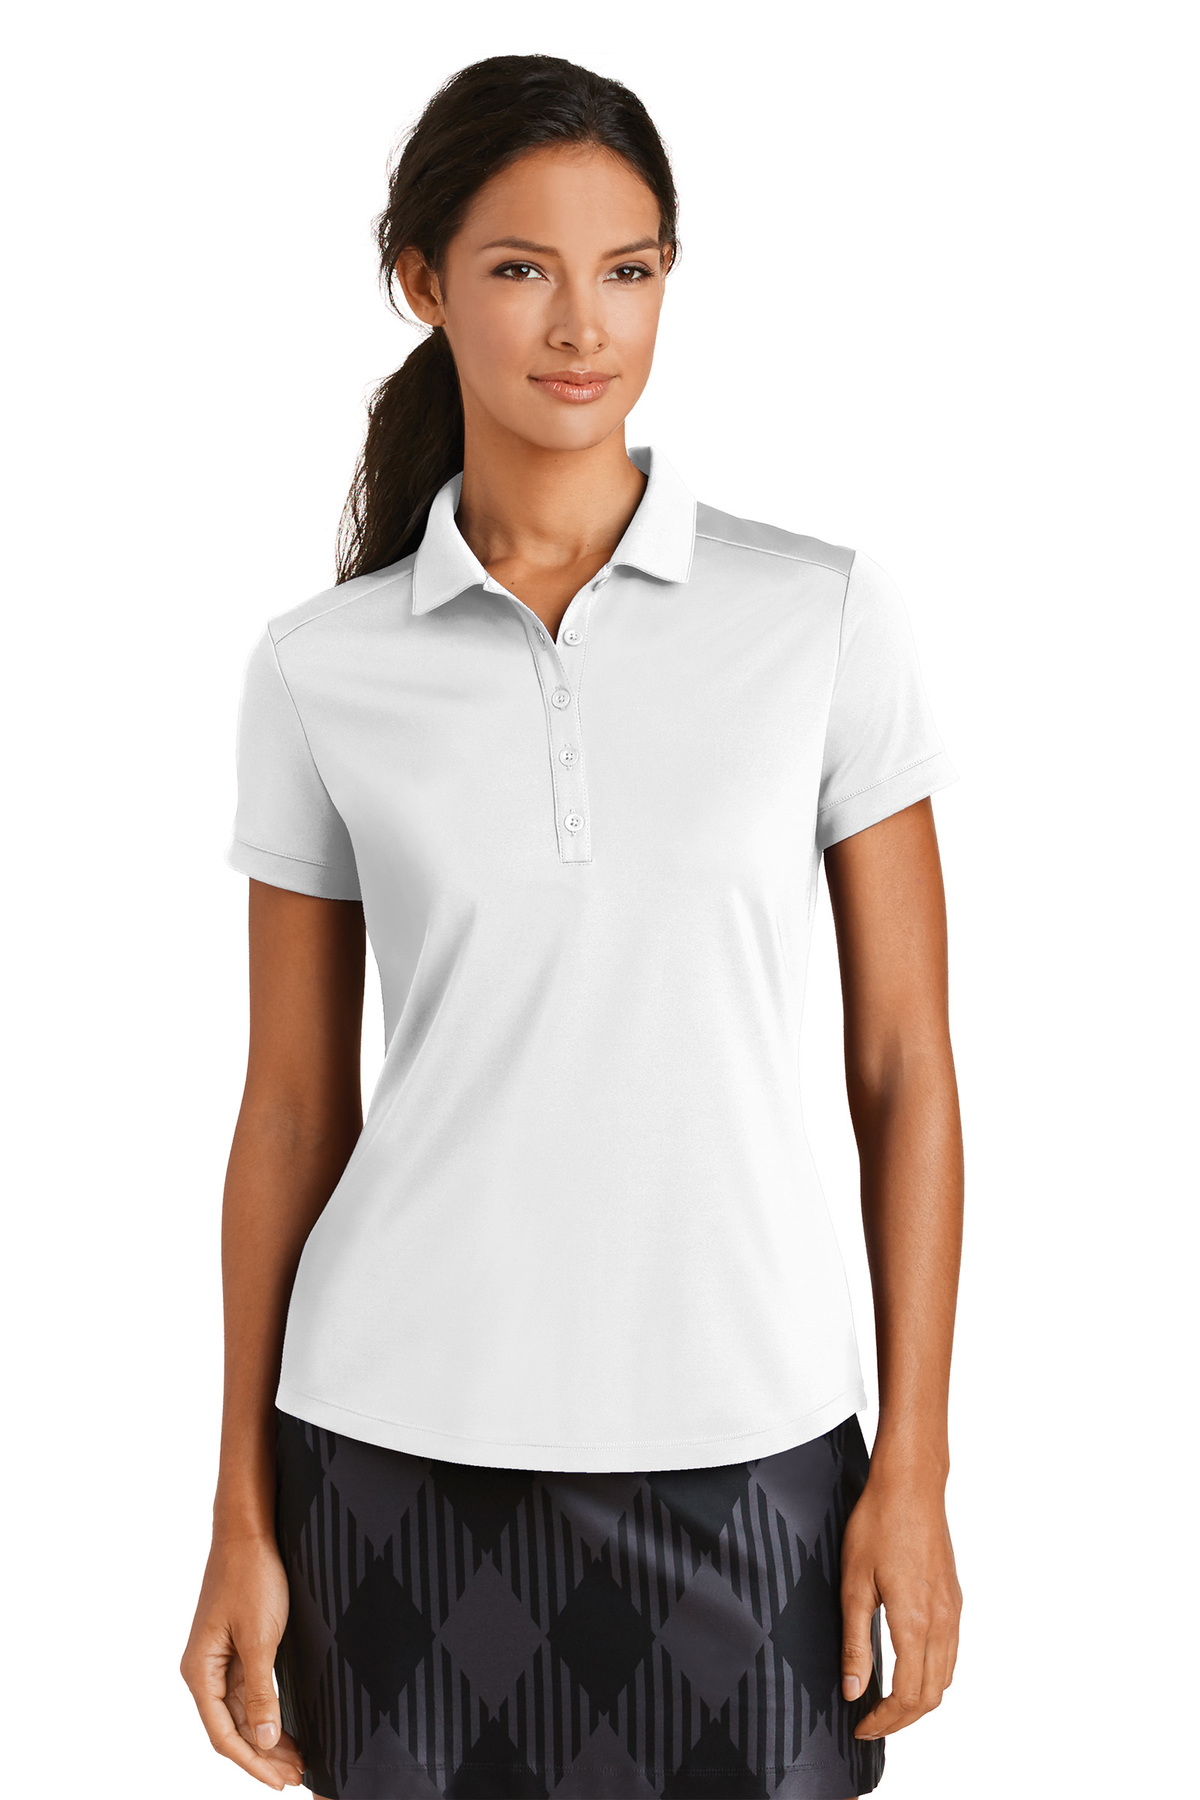 Nike Golf Embroidered Women's Dri-FIT Players Modern Fit Polo - Queensboro